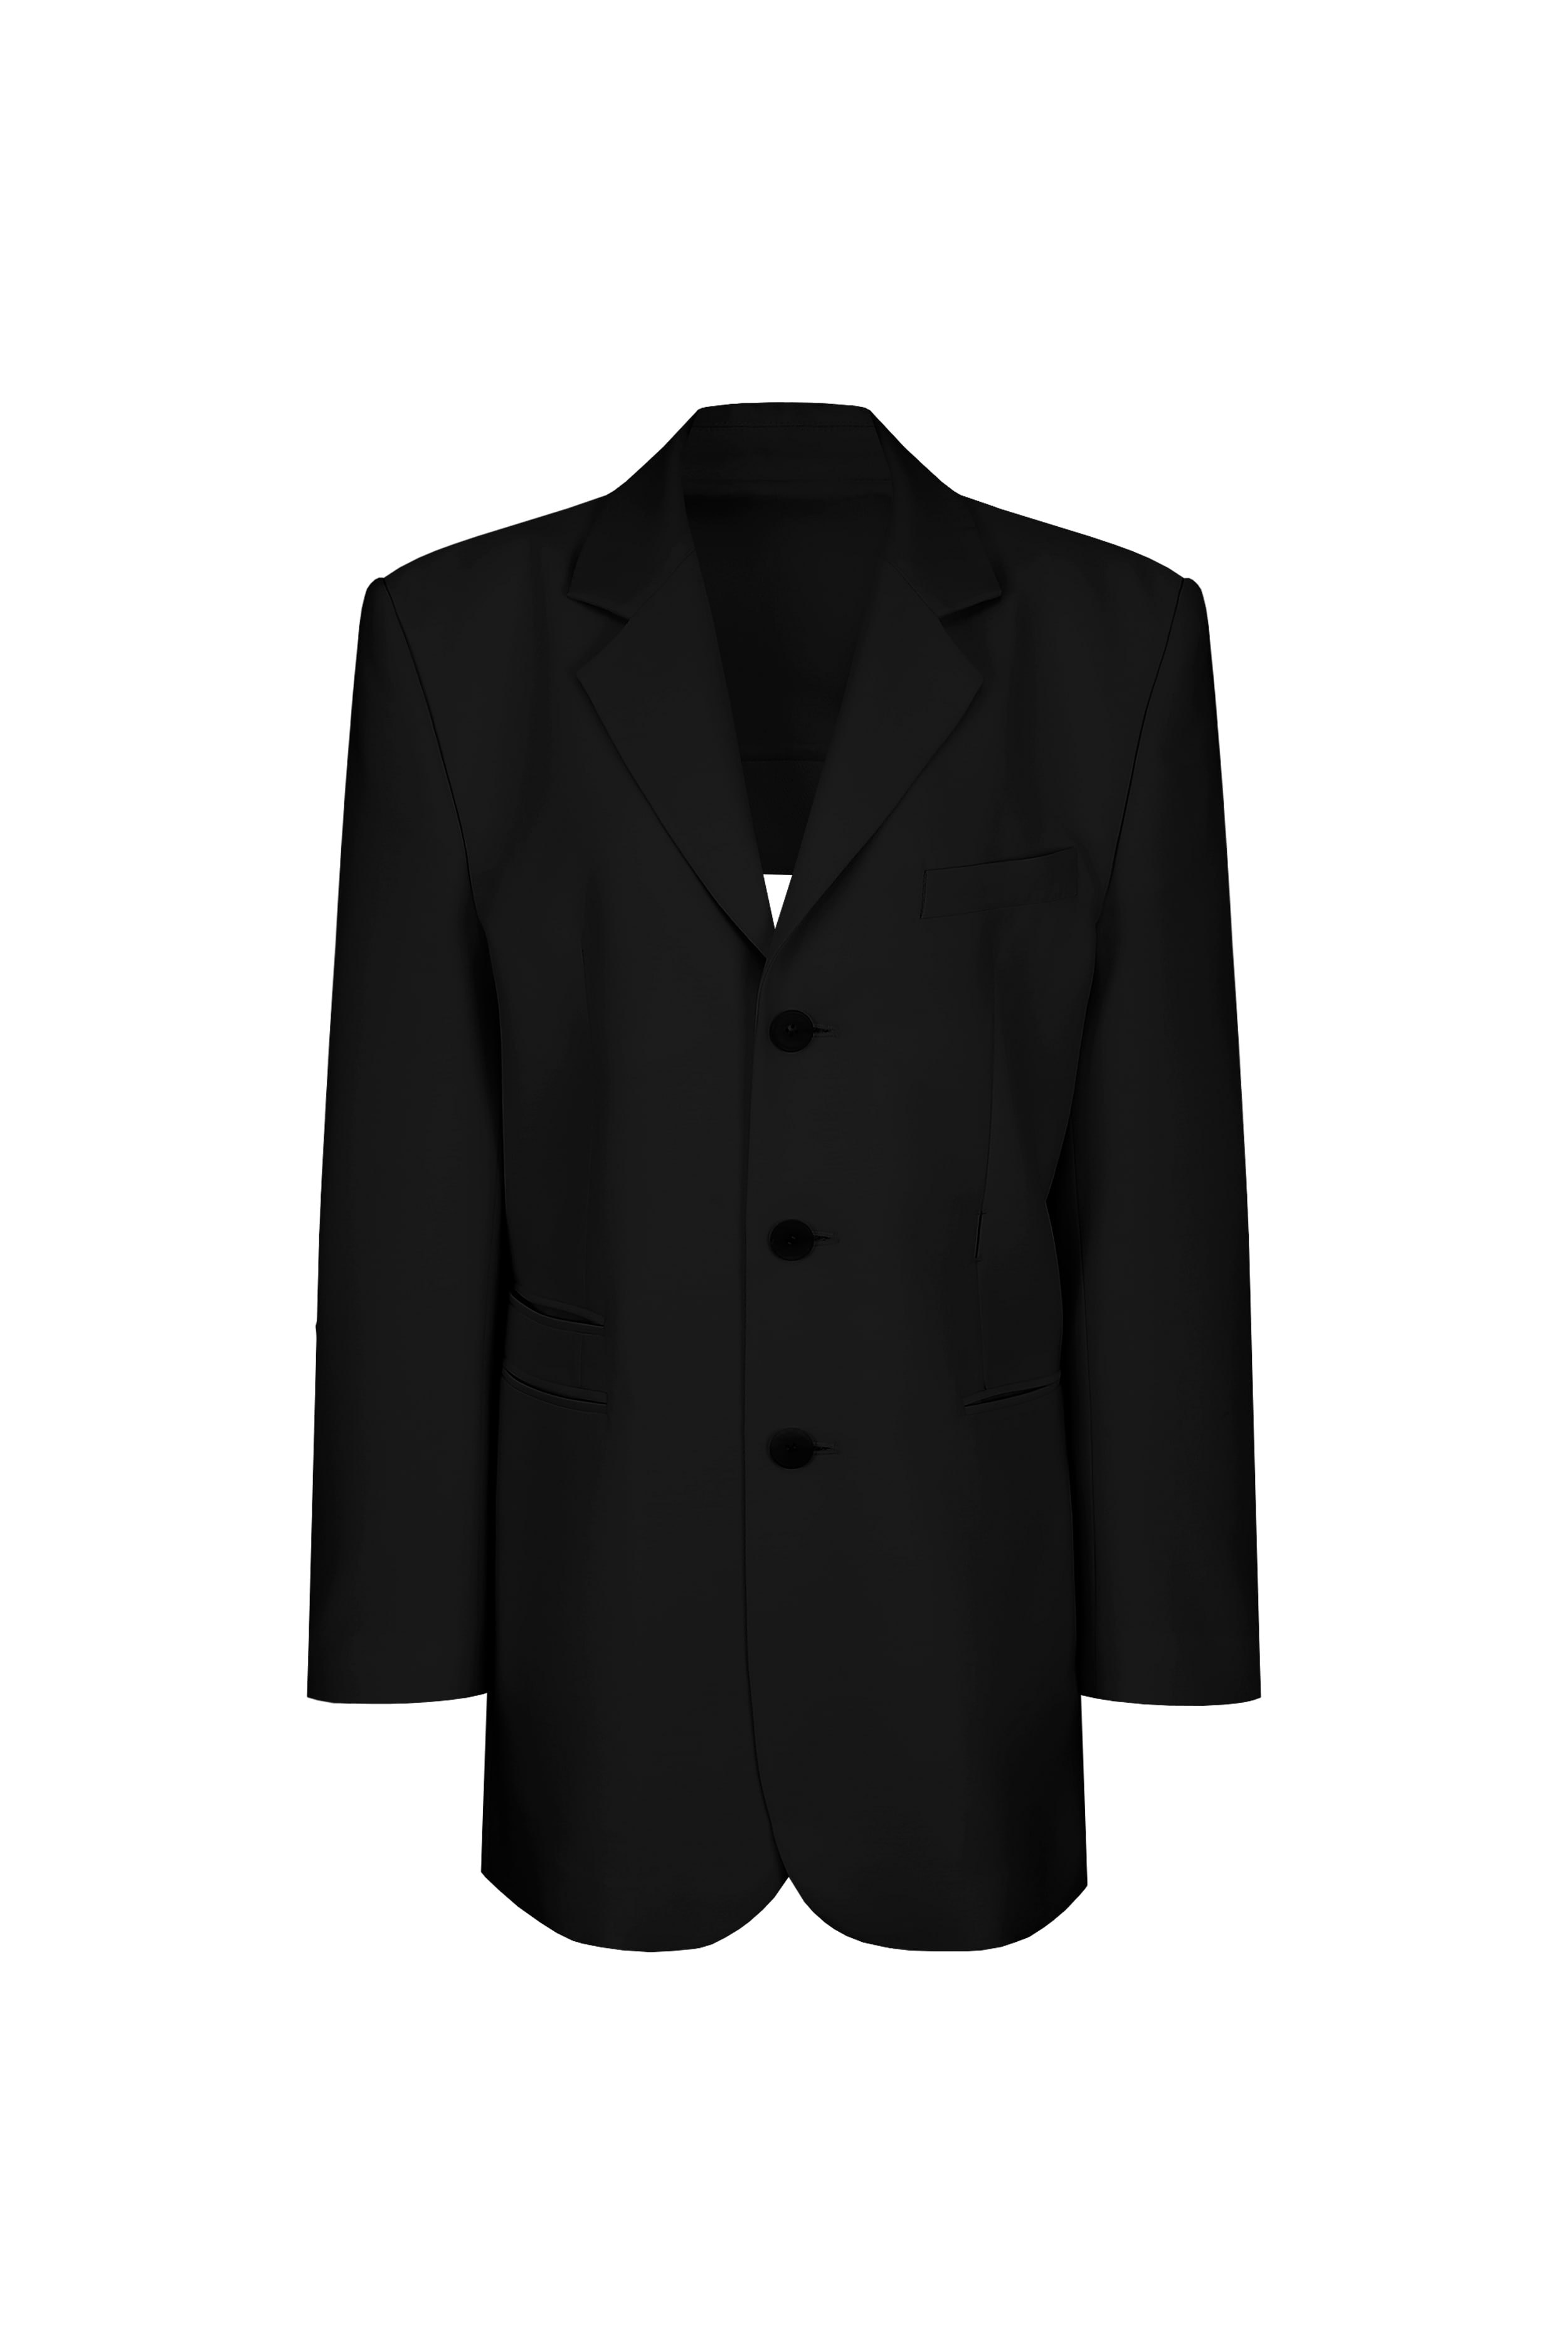 Astral Couture Wool Jacket